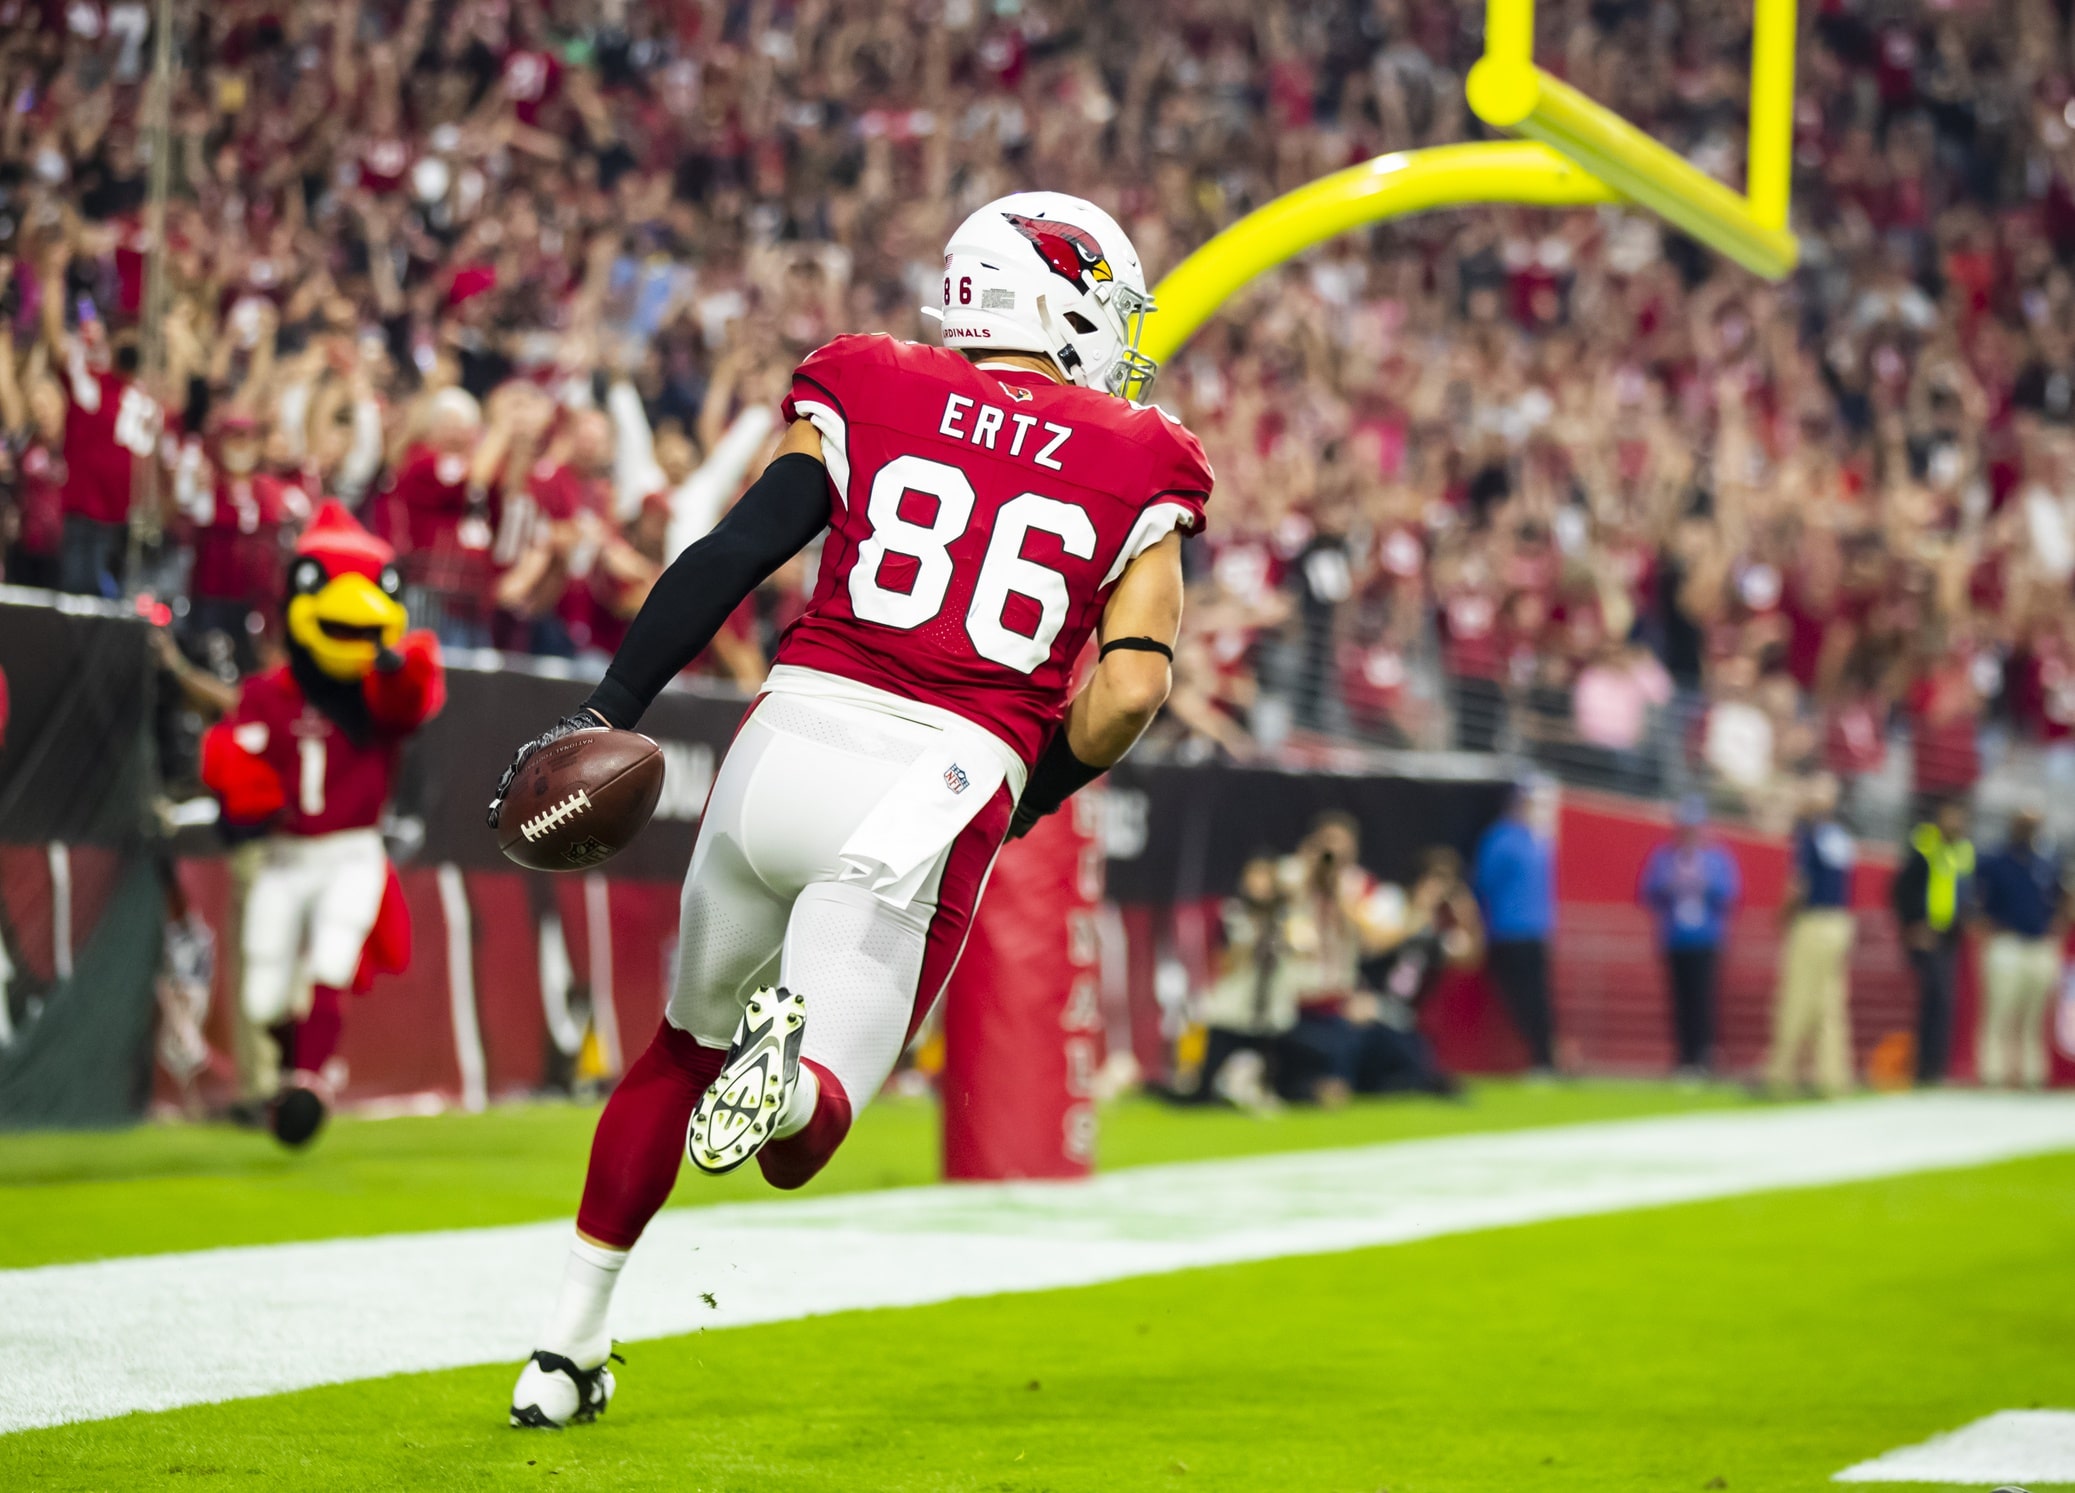 Arizona Cardinals tight end Zach Ertz (86) celebrates after scoring a touchdown against the Houston Texans in the second half at State Farm Stadium.